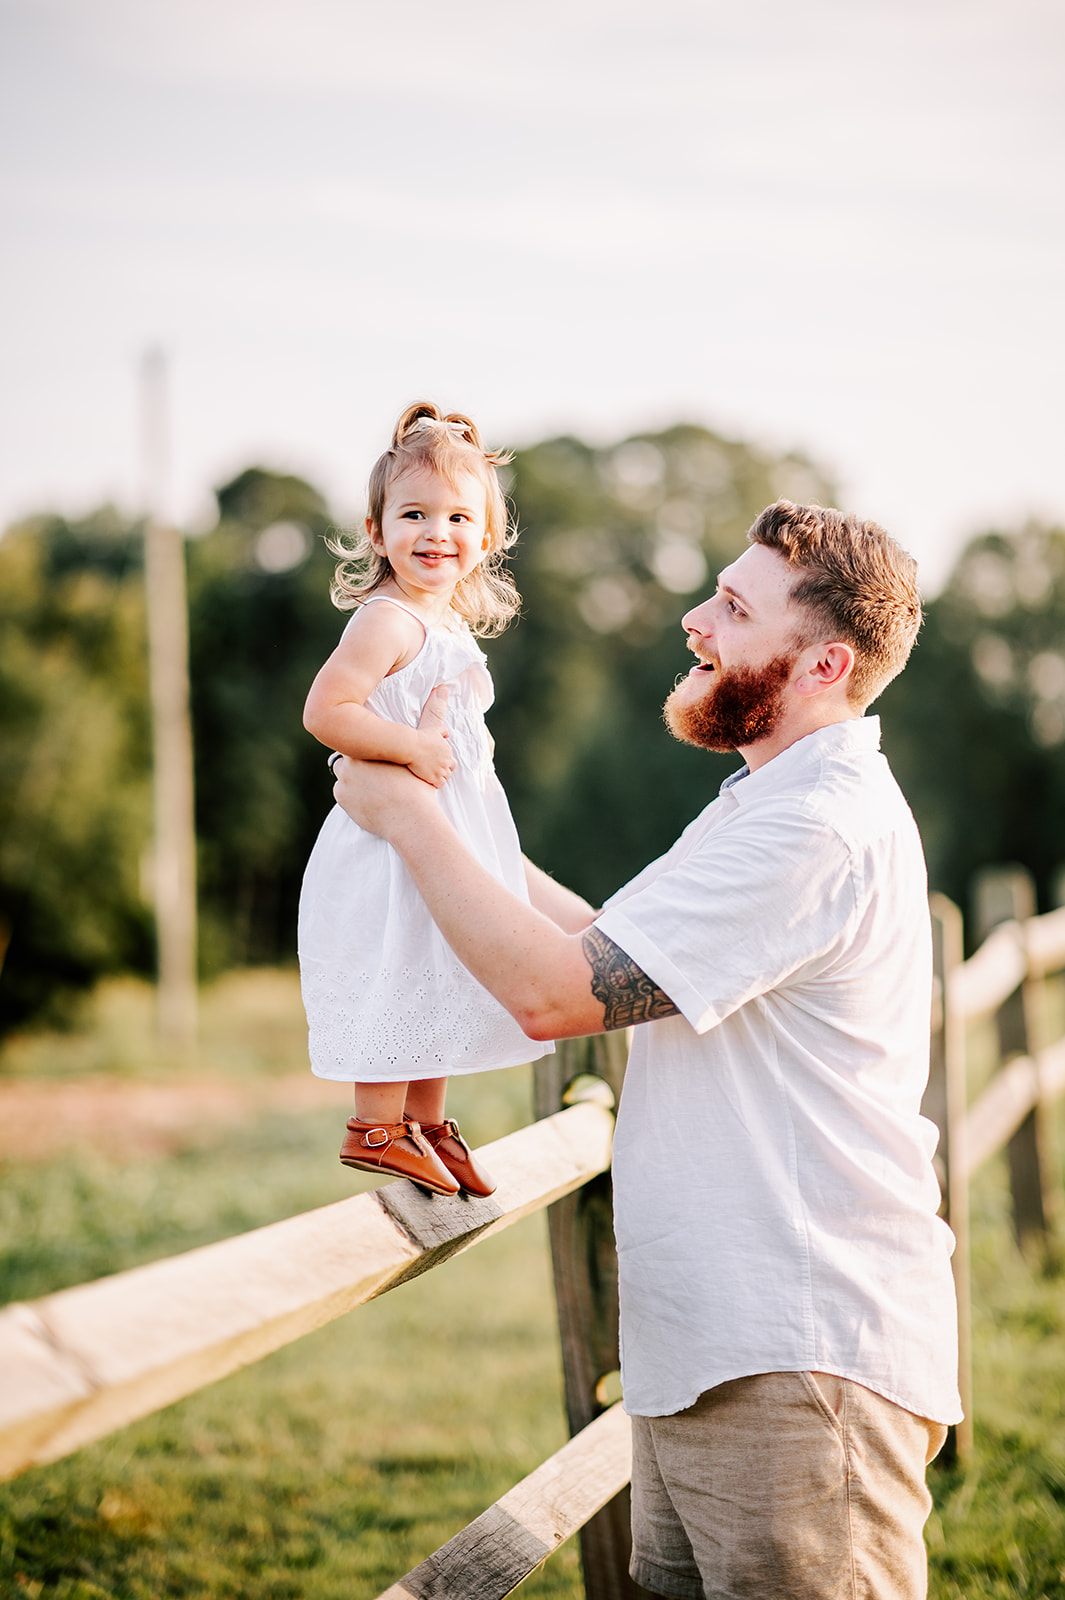 A toddler girl in a white dress stands on a wooden fence while dad holds her